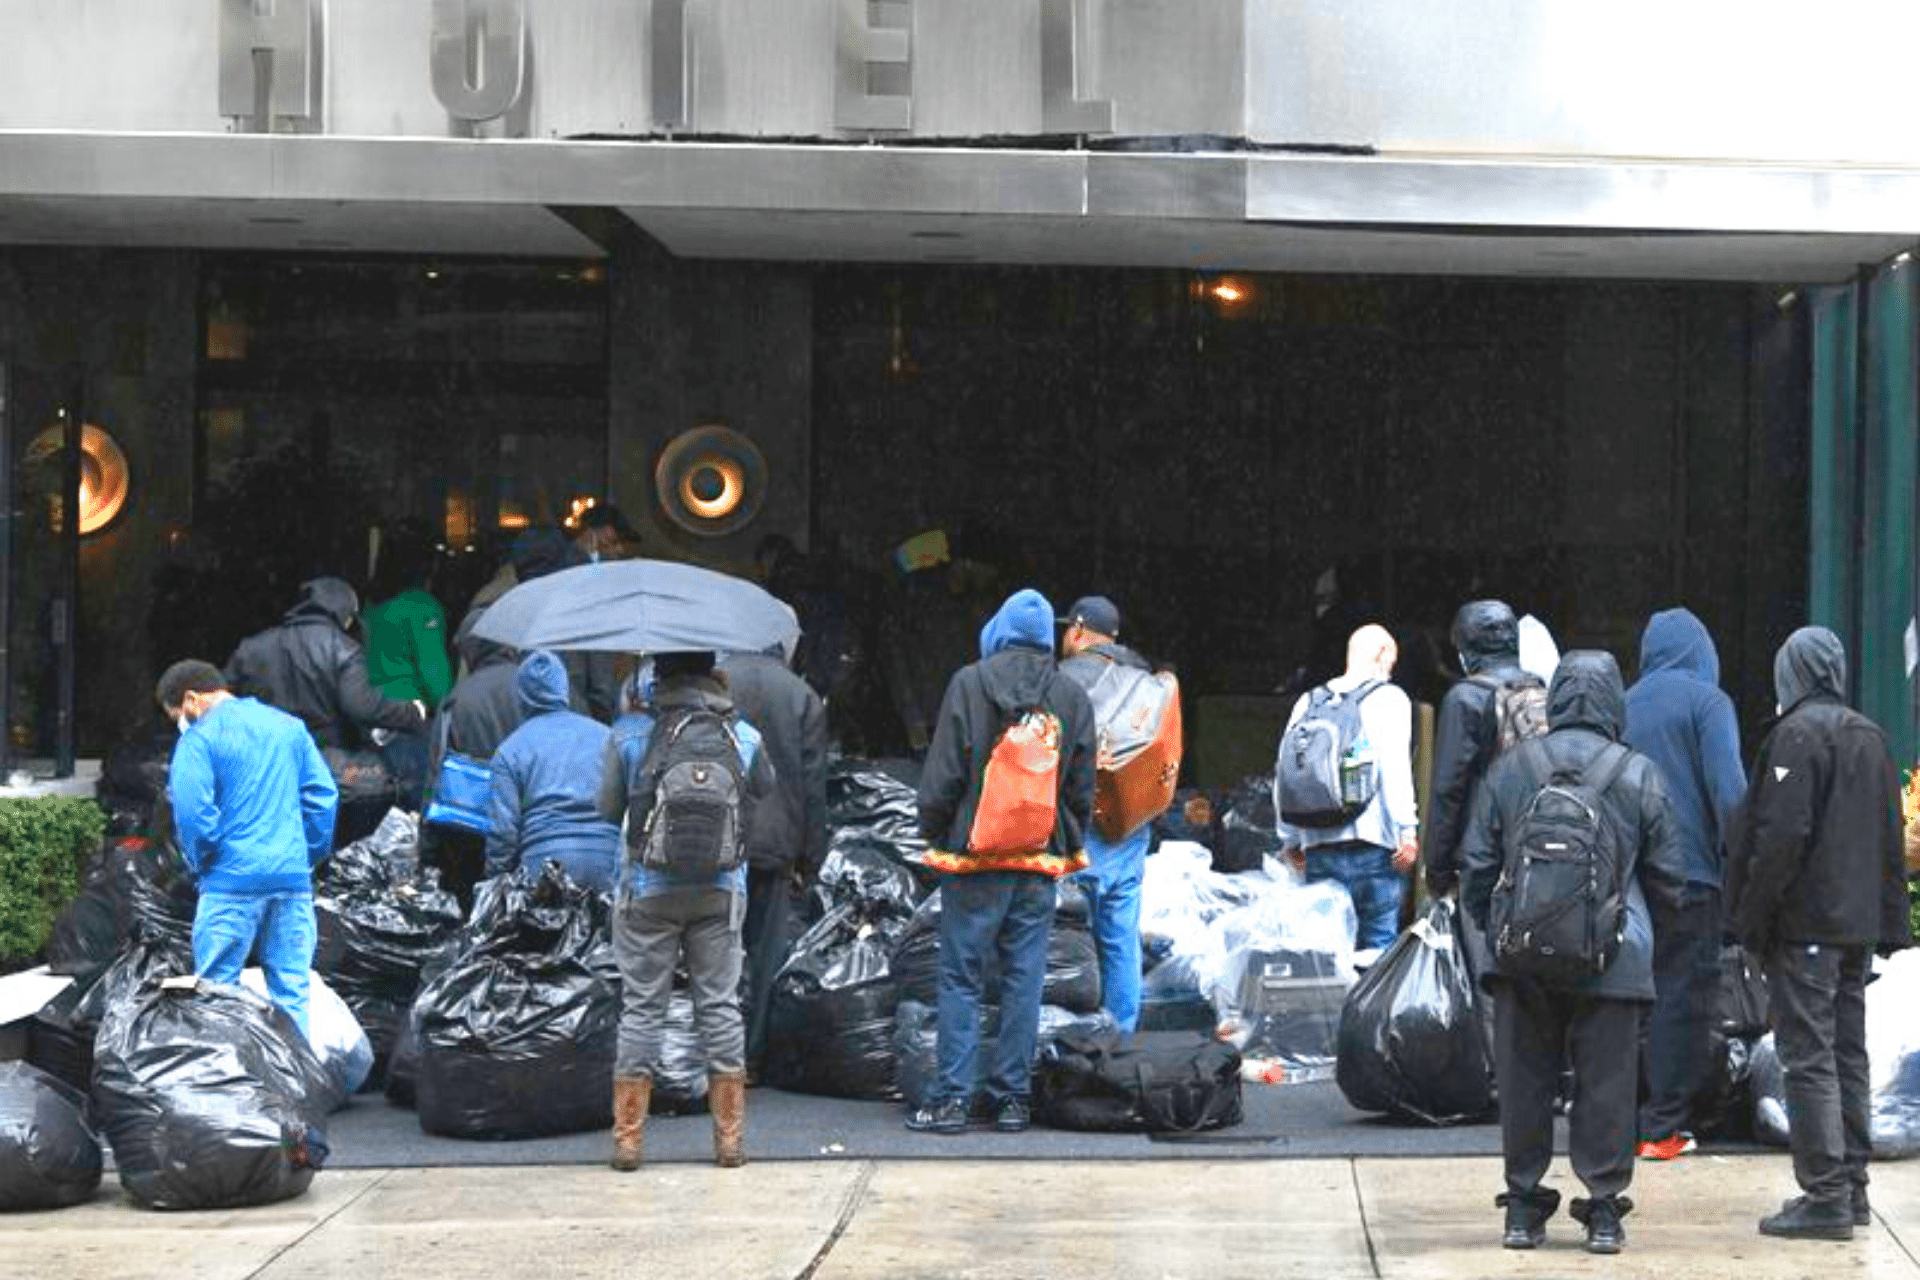 Image of a group of people with garbage bags outside a hotel.